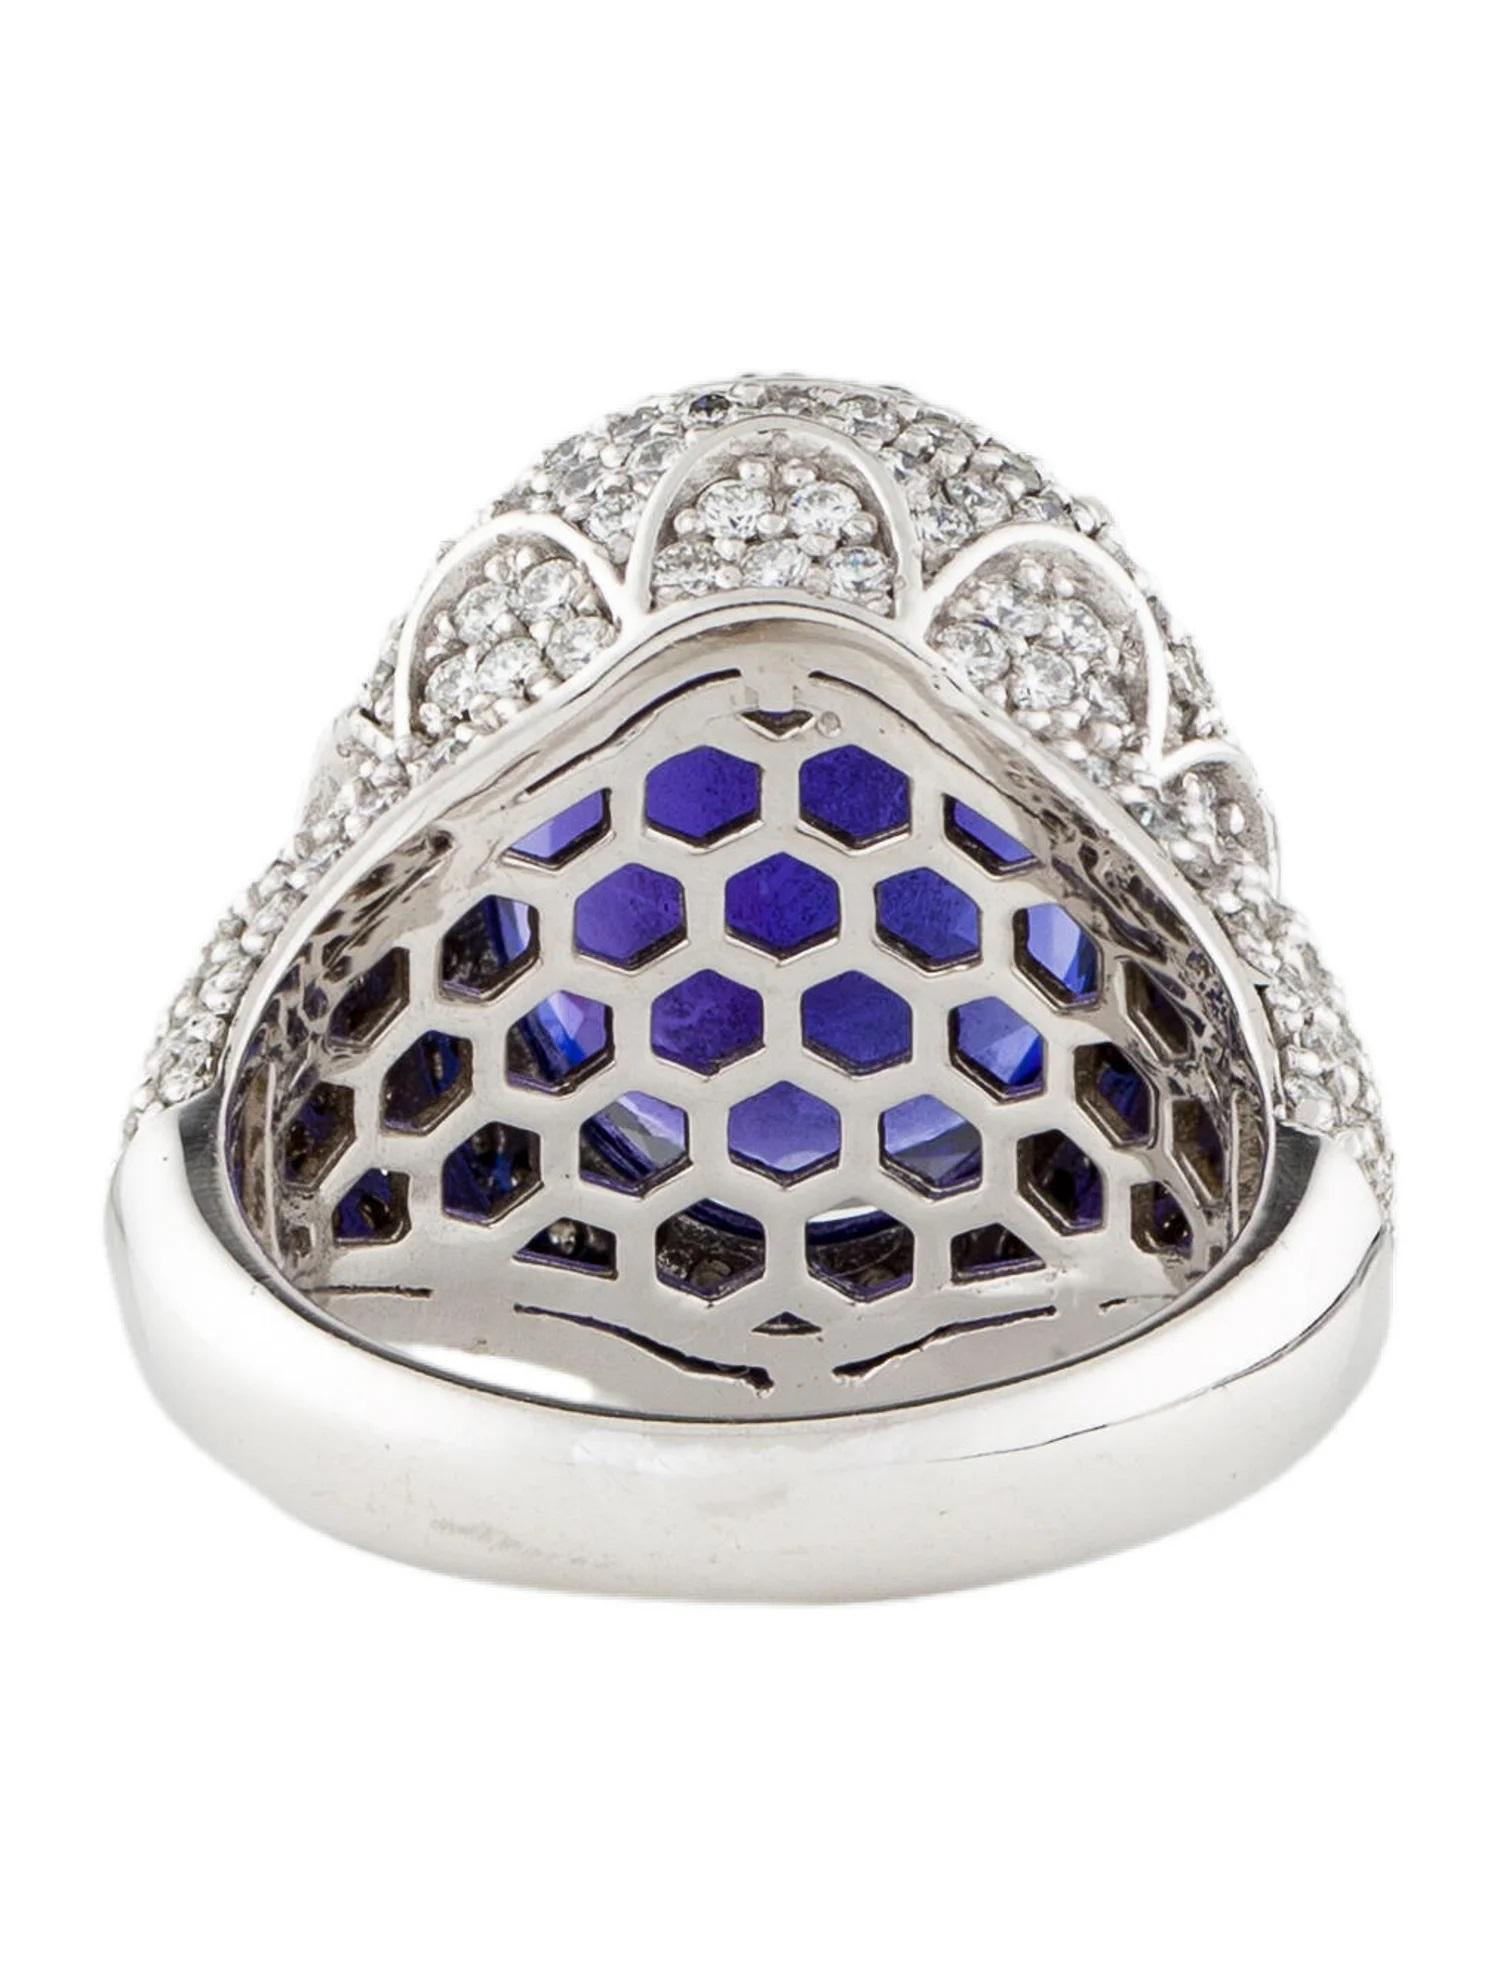 Oval Cut 10.89 Ct Tanzanite & Diamond Cocktail Ring 14K White Gold For Sale